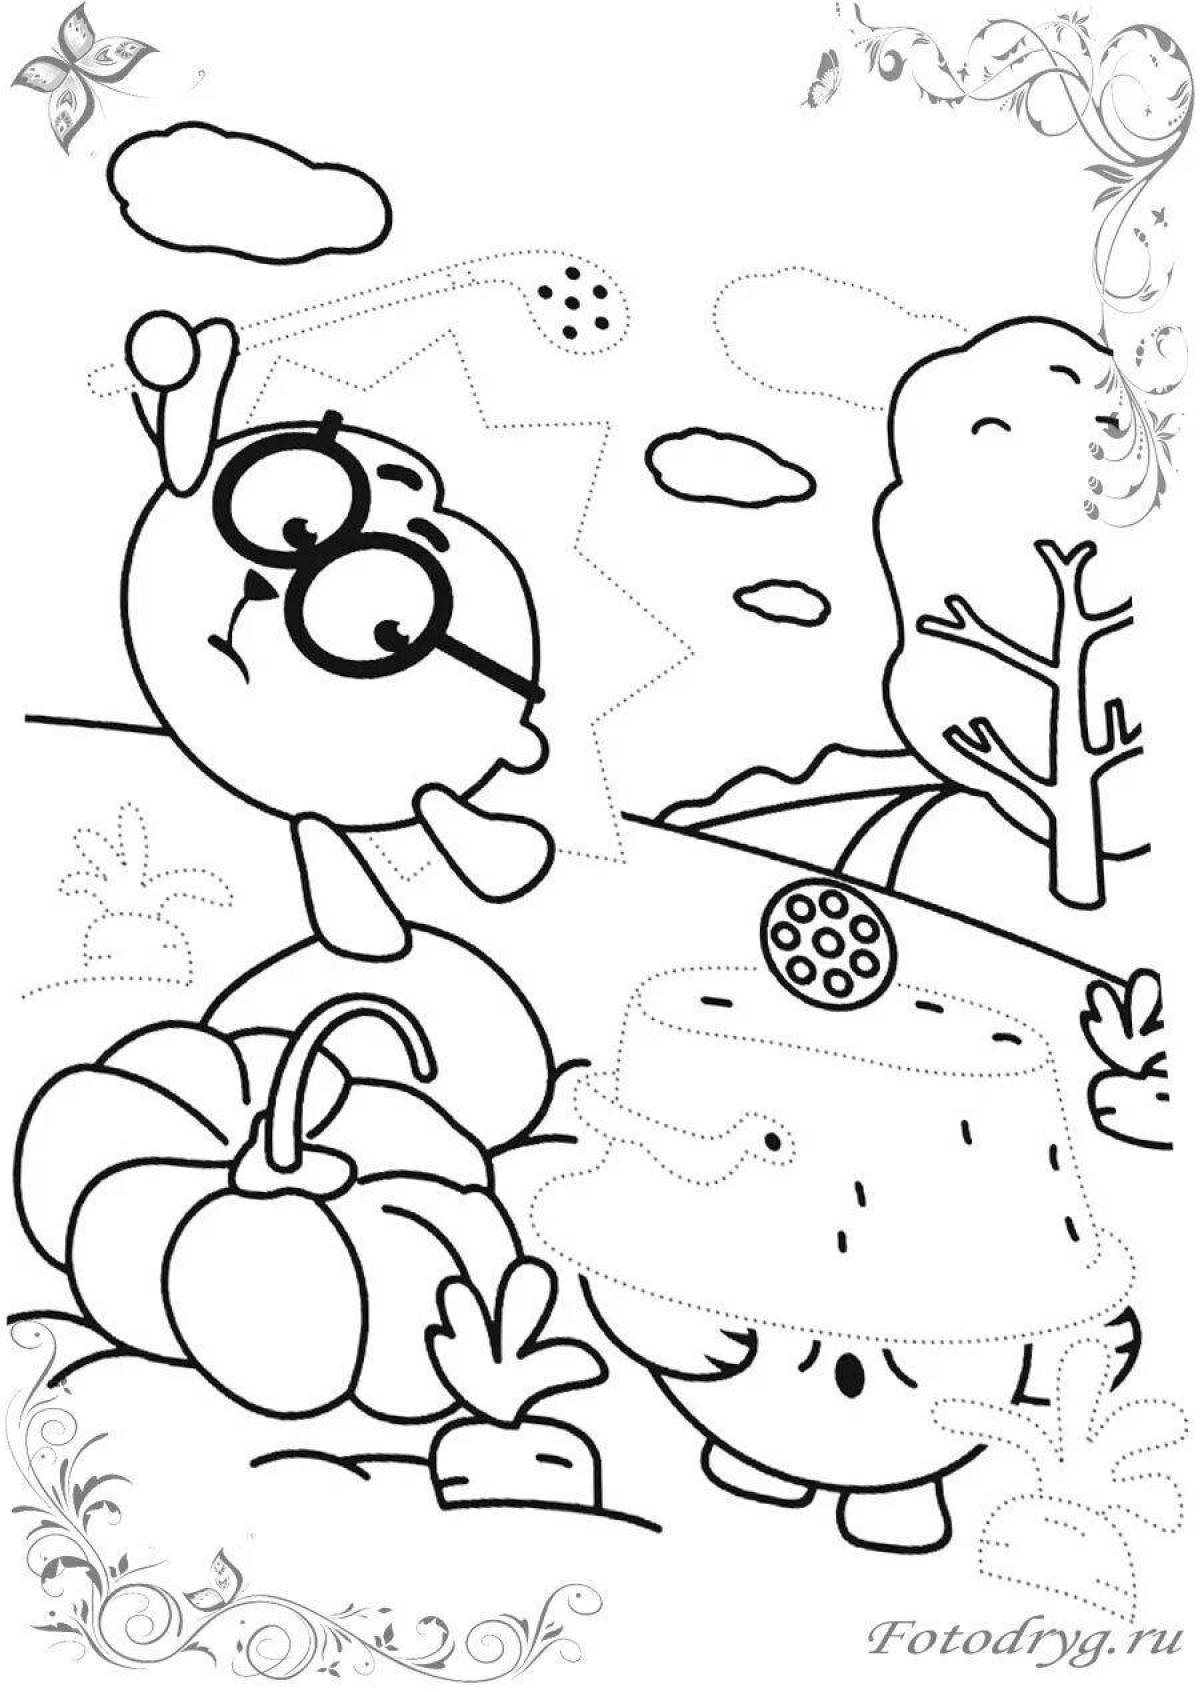 Exquisite chrum coloring page